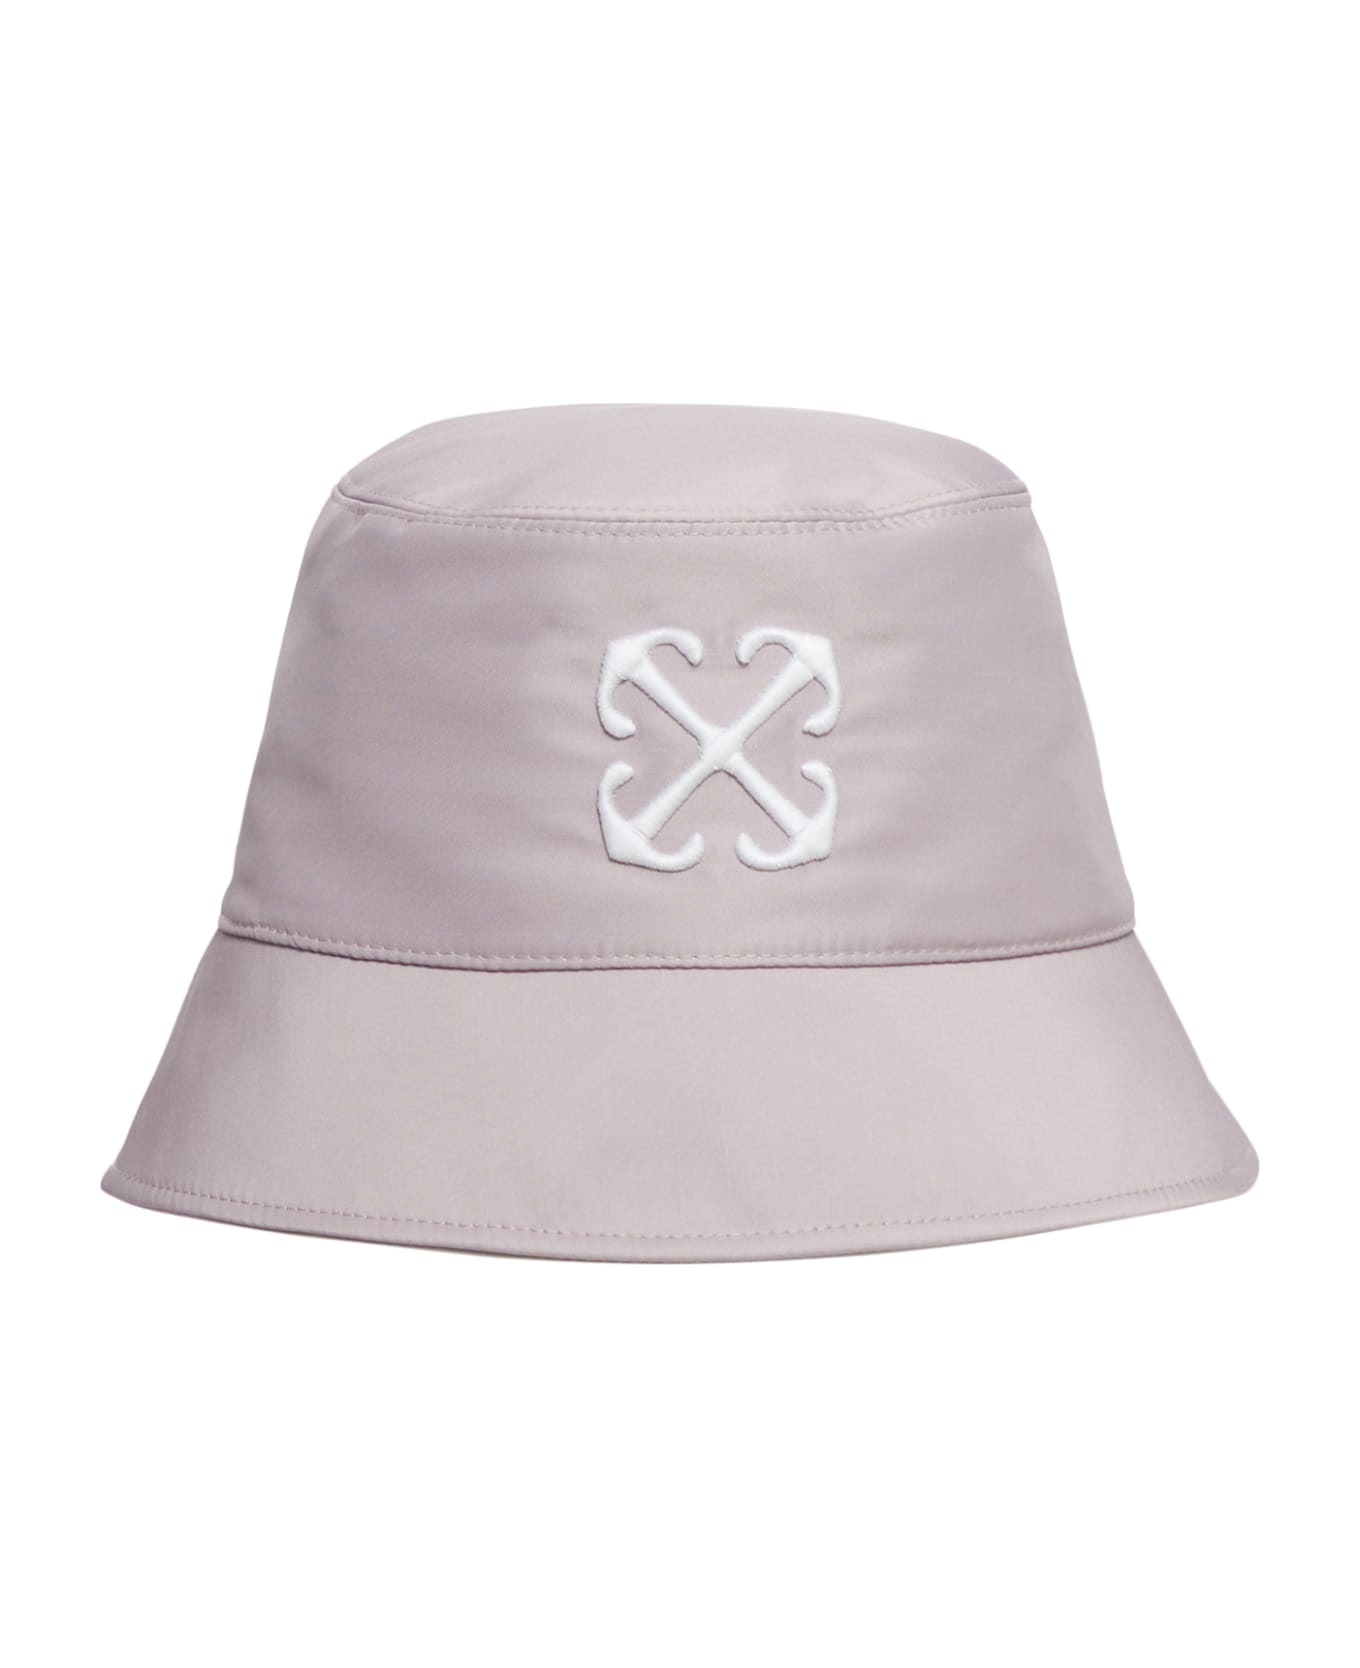 Off-White Arrow Bucket Hat - Burnished Lilac White